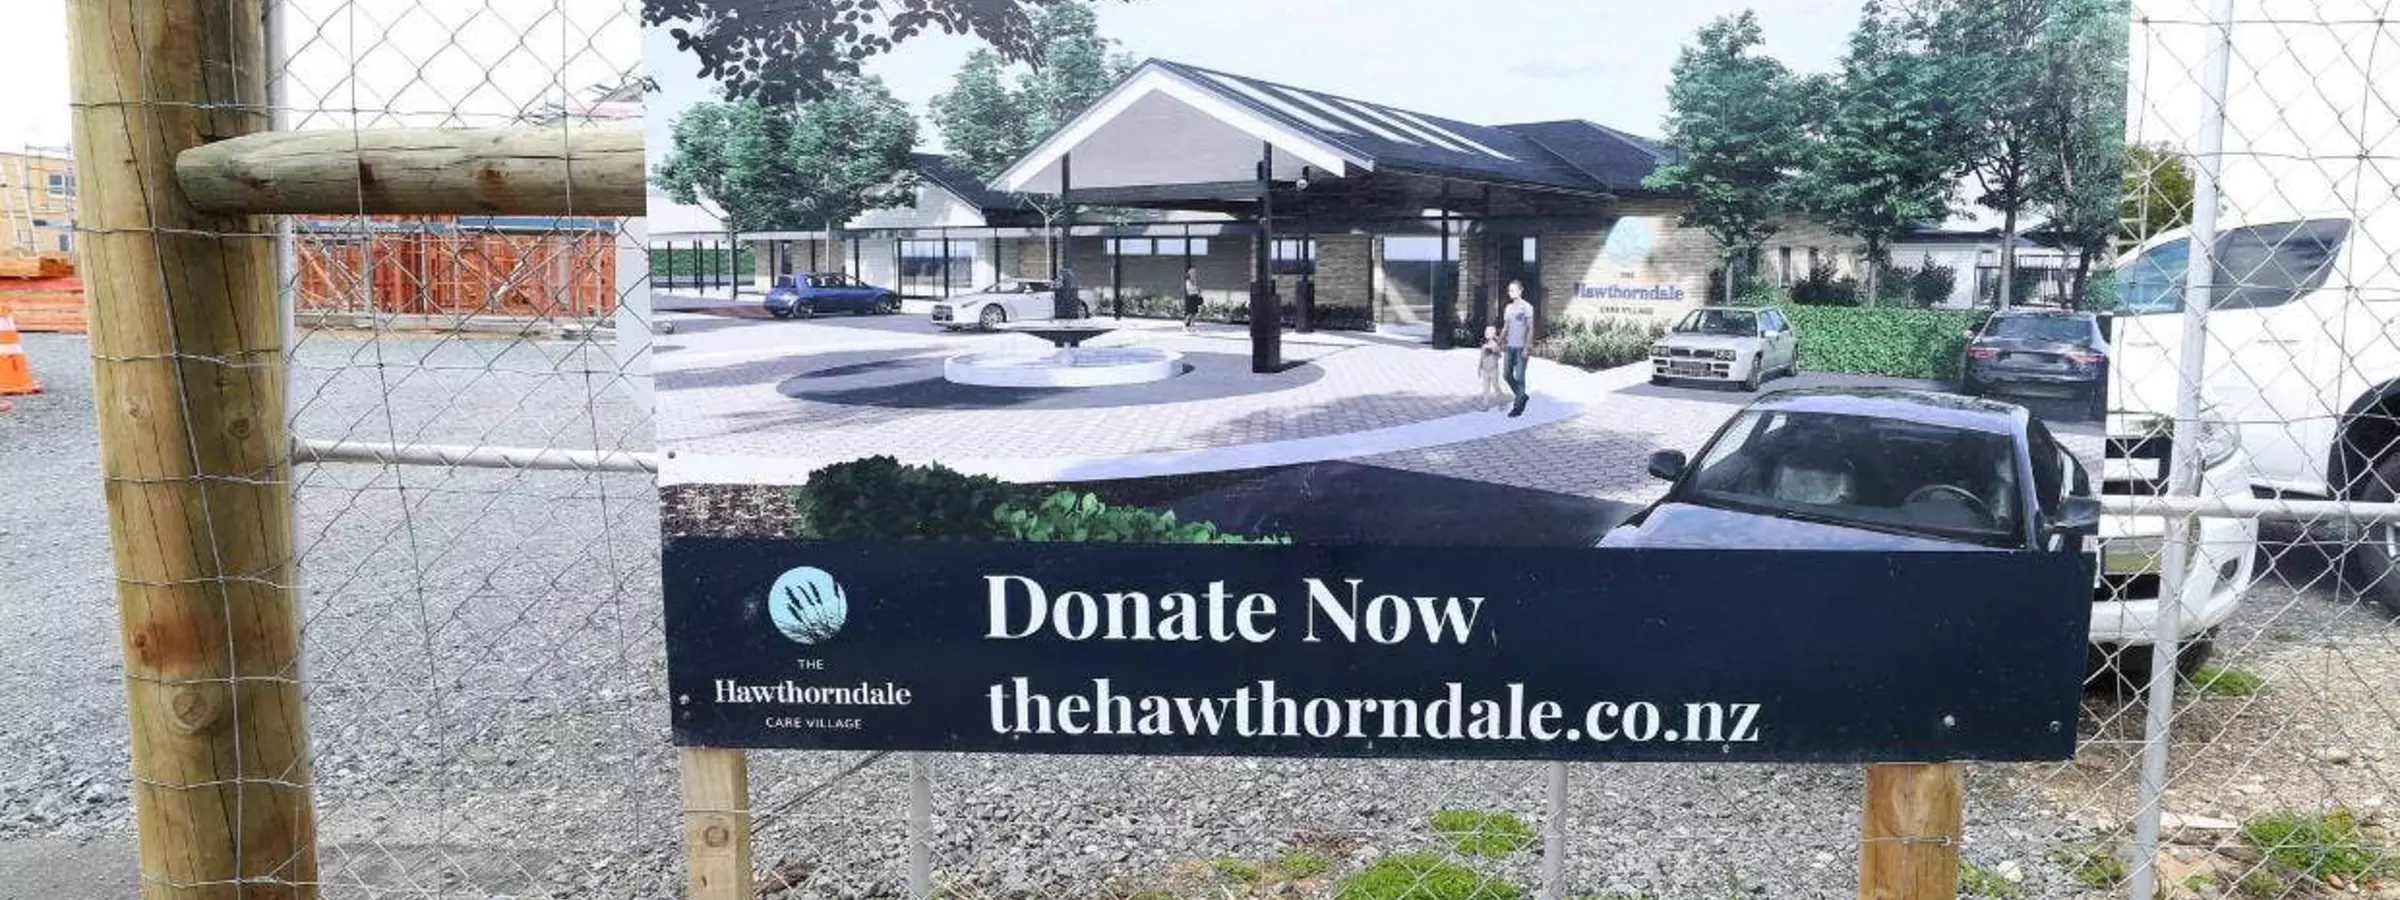 A peek at what the Hawthorndale Care Village will look like from the Tay St entrance in Invercargill